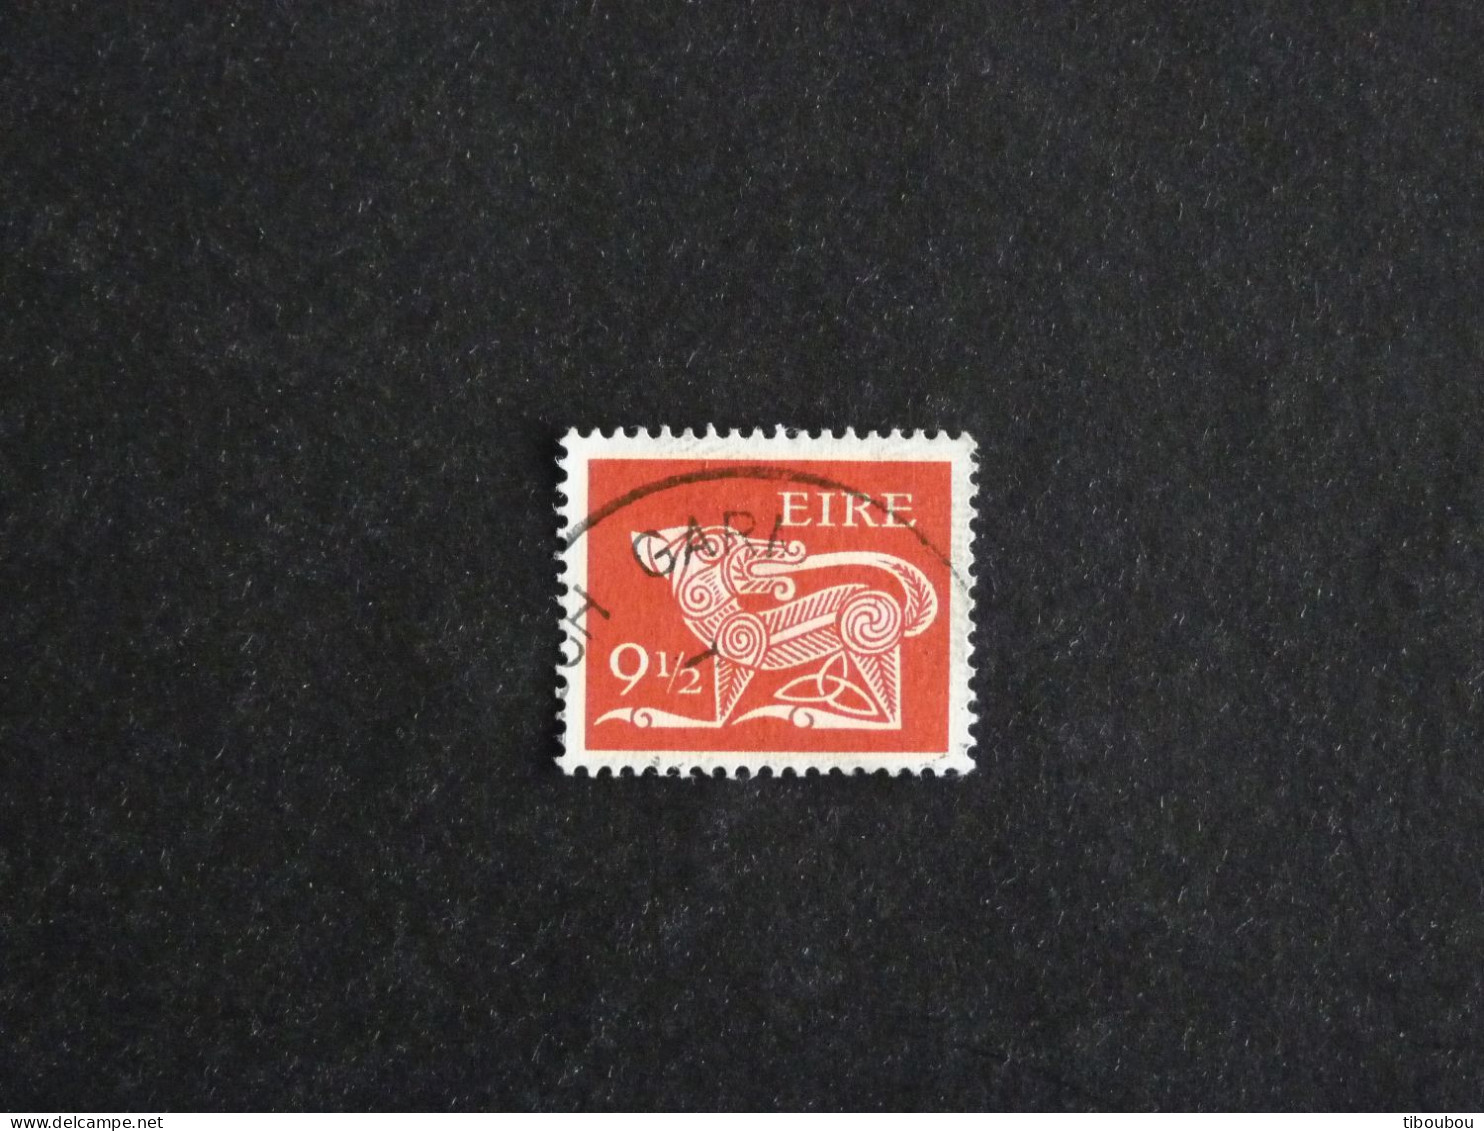 IRLANDE IRELAND EIRE YT 414 OBLITERE - CHIEN STYLISE BROCHE ANCIENNE - Used Stamps